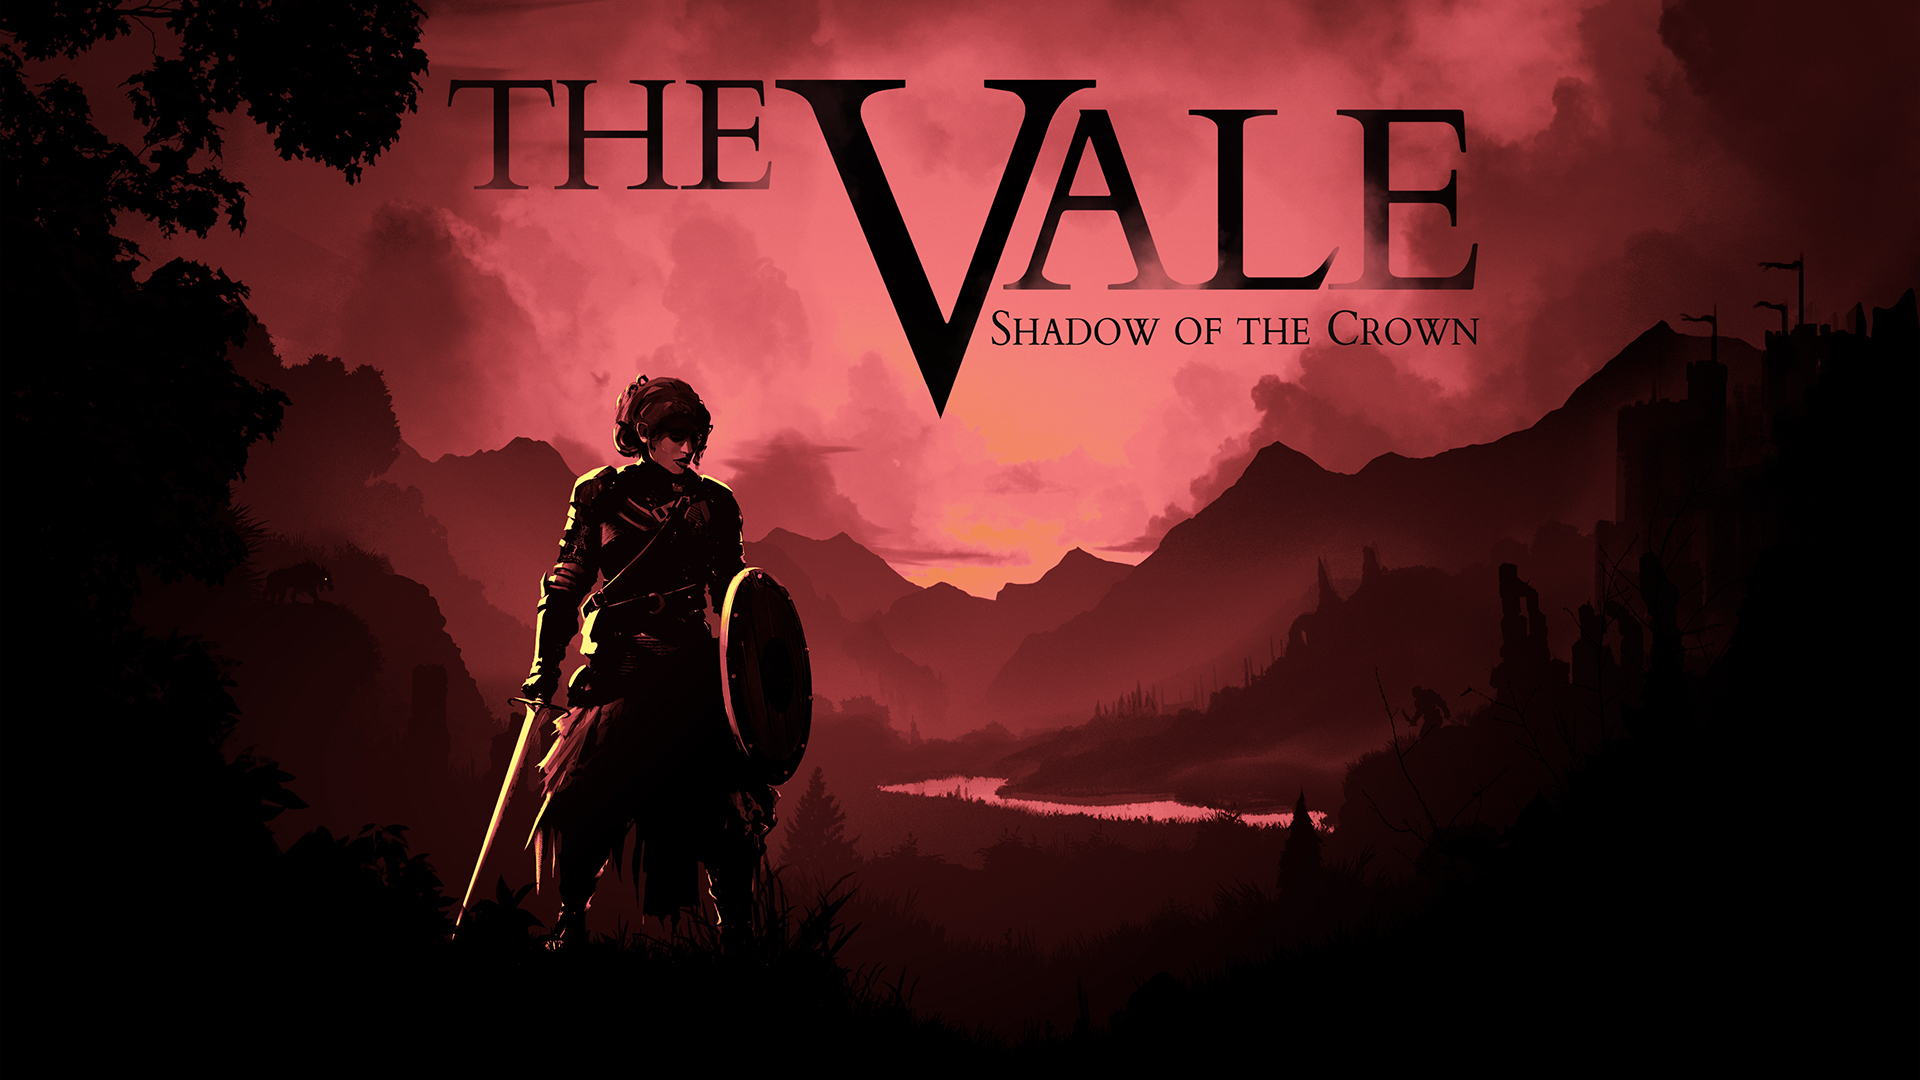 The Vale Cover Art